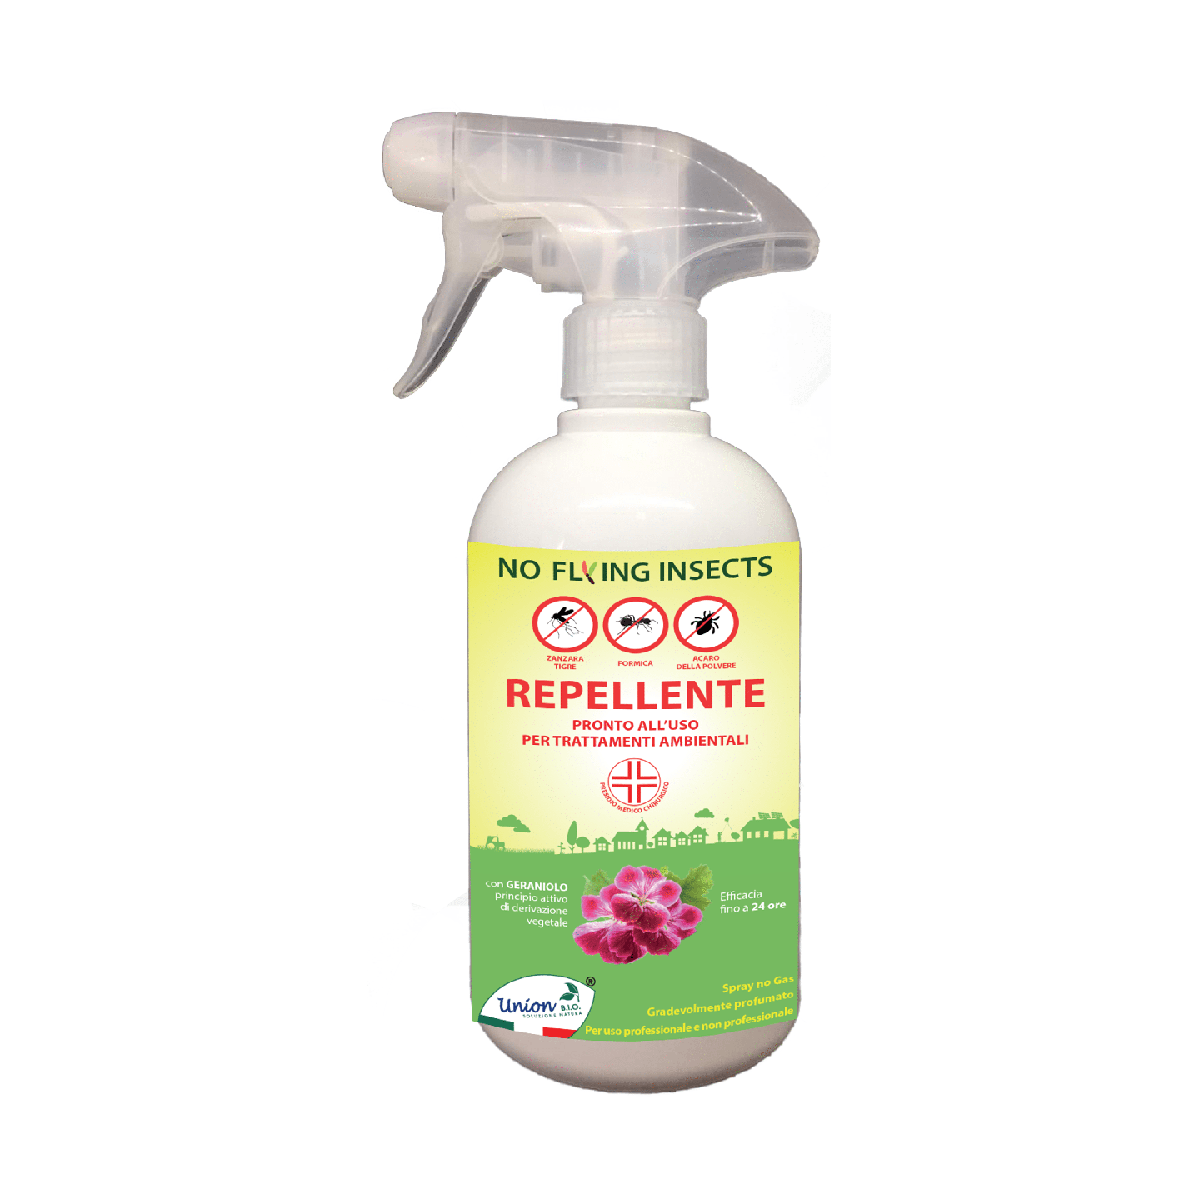 No Flying Insects Insetto-acaro repellente pronto uso 500ml